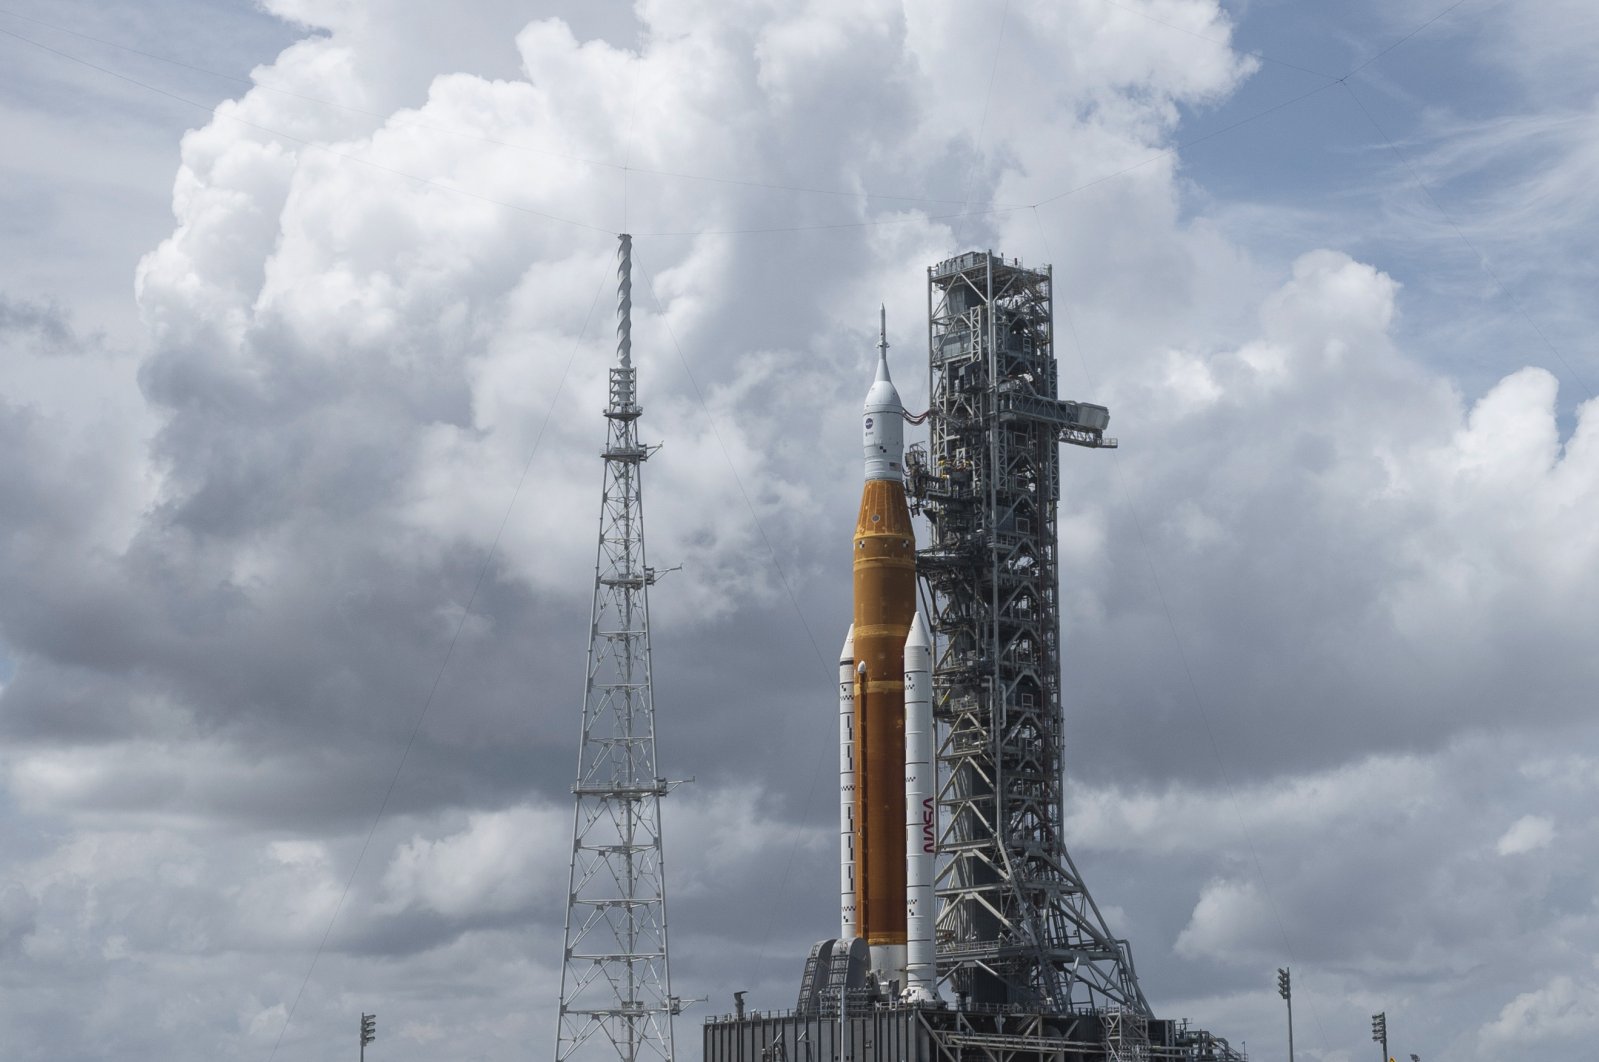 NASA&#039;s Space Launch System (SLS) rocket with the Orion spacecraft aboard is seen atop the mobile launcher at Launch Pad 39B, at Kennedy Space Center in Cape Canaveral, Florida, U.S., Aug. 30, 2022. (AP Photo)